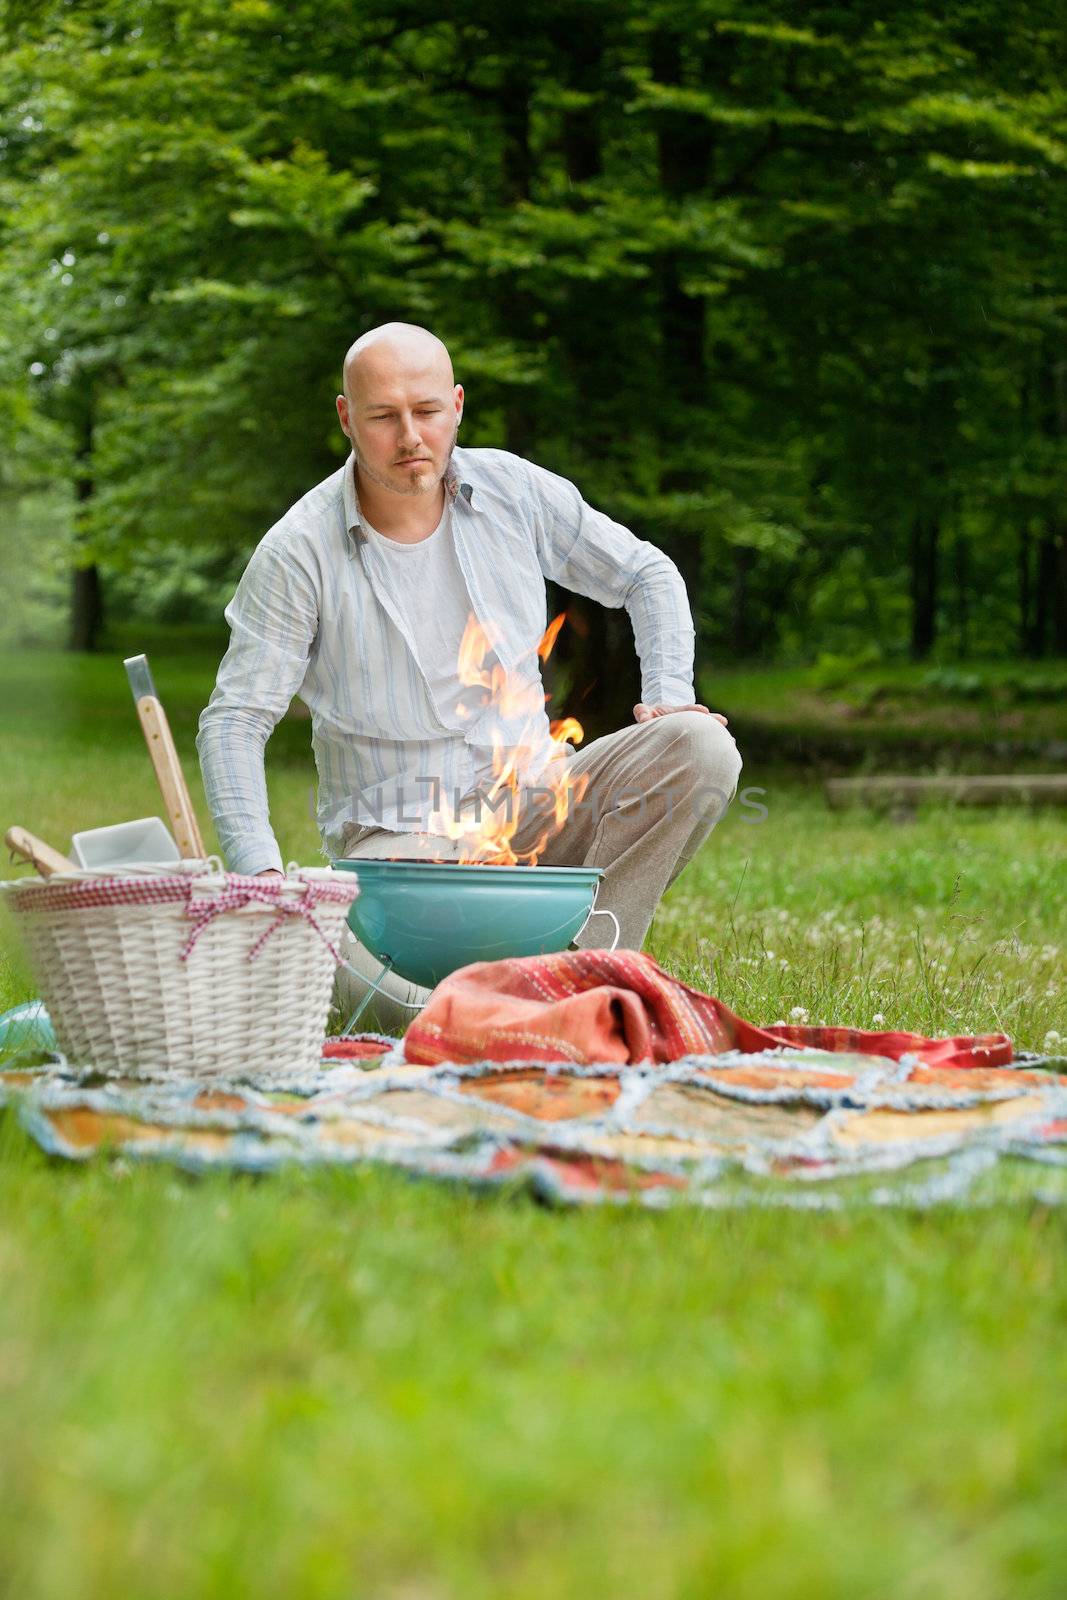 Mature man in casual wear with a flaming portable barbecue at an outdoor picnic